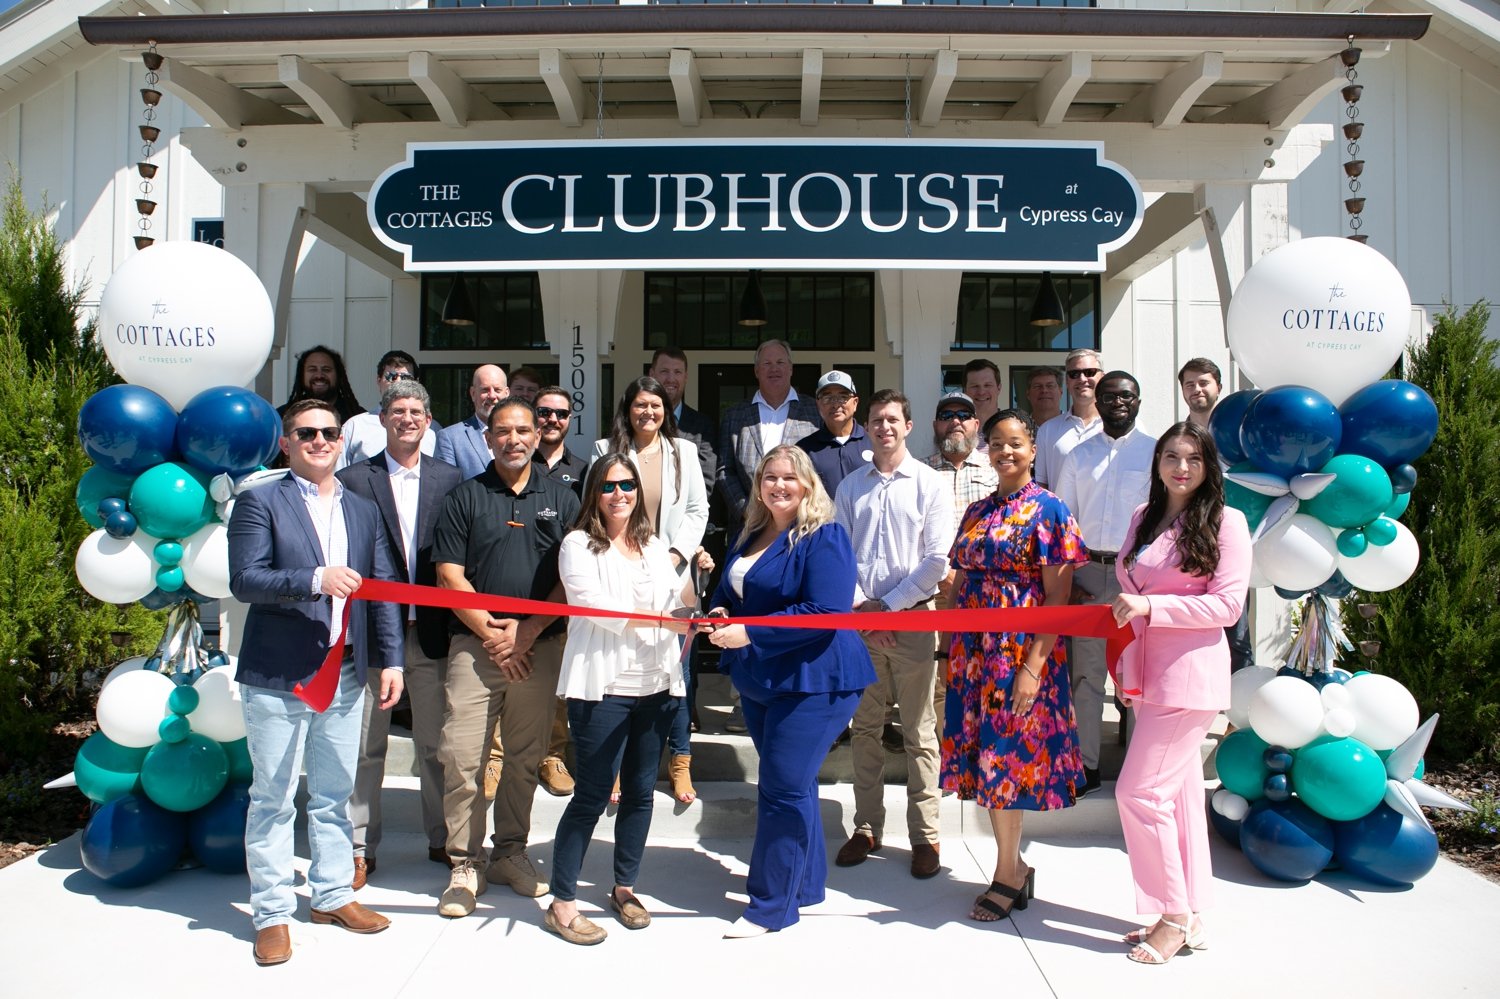 Tampa-Ribbon-Cutting-The-Cottages-at-Cypress-Cay 4.jpg